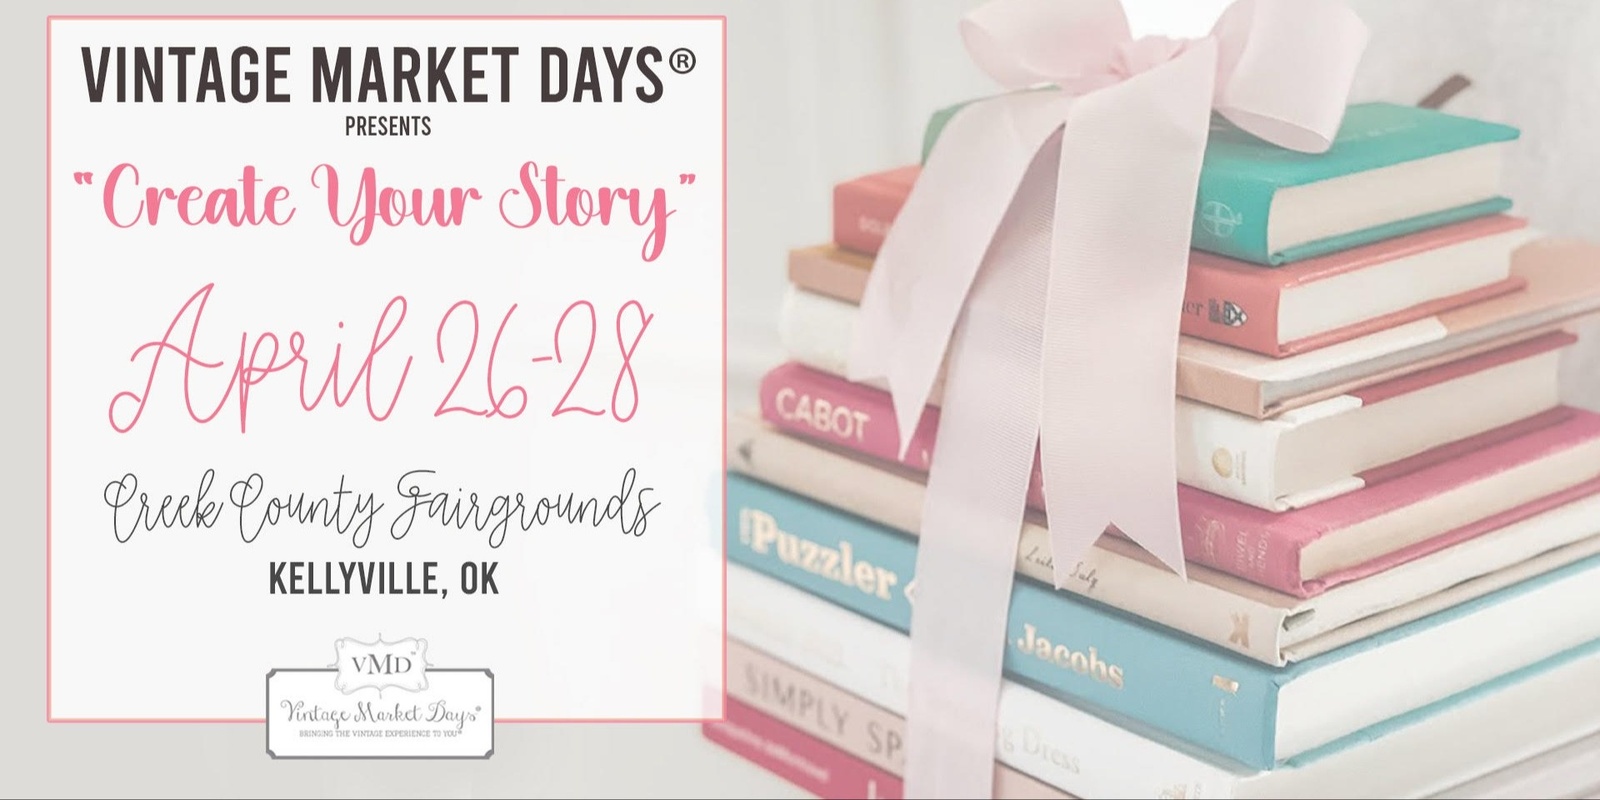 Banner image for Vintage Market Days Presents - "Create Your Story"